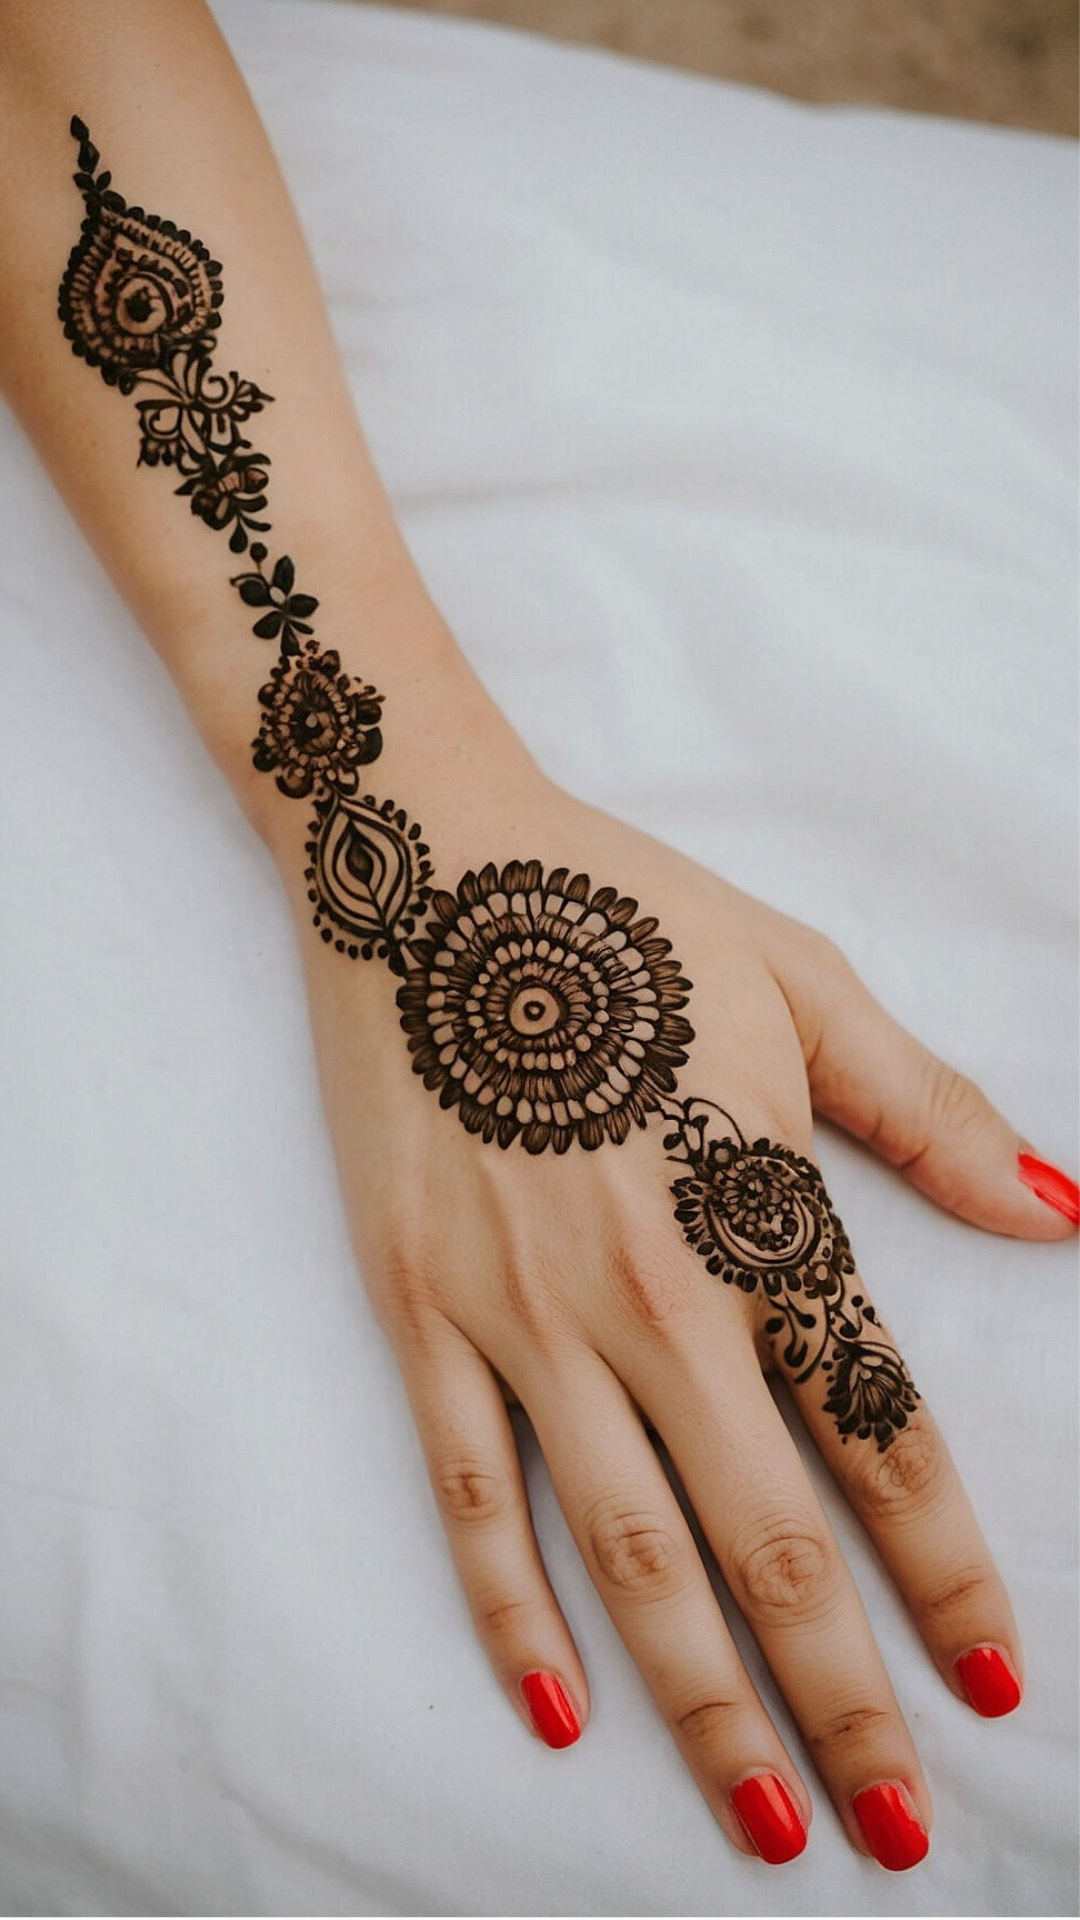 Sizzling Summer Henna Patterns to Inspire You